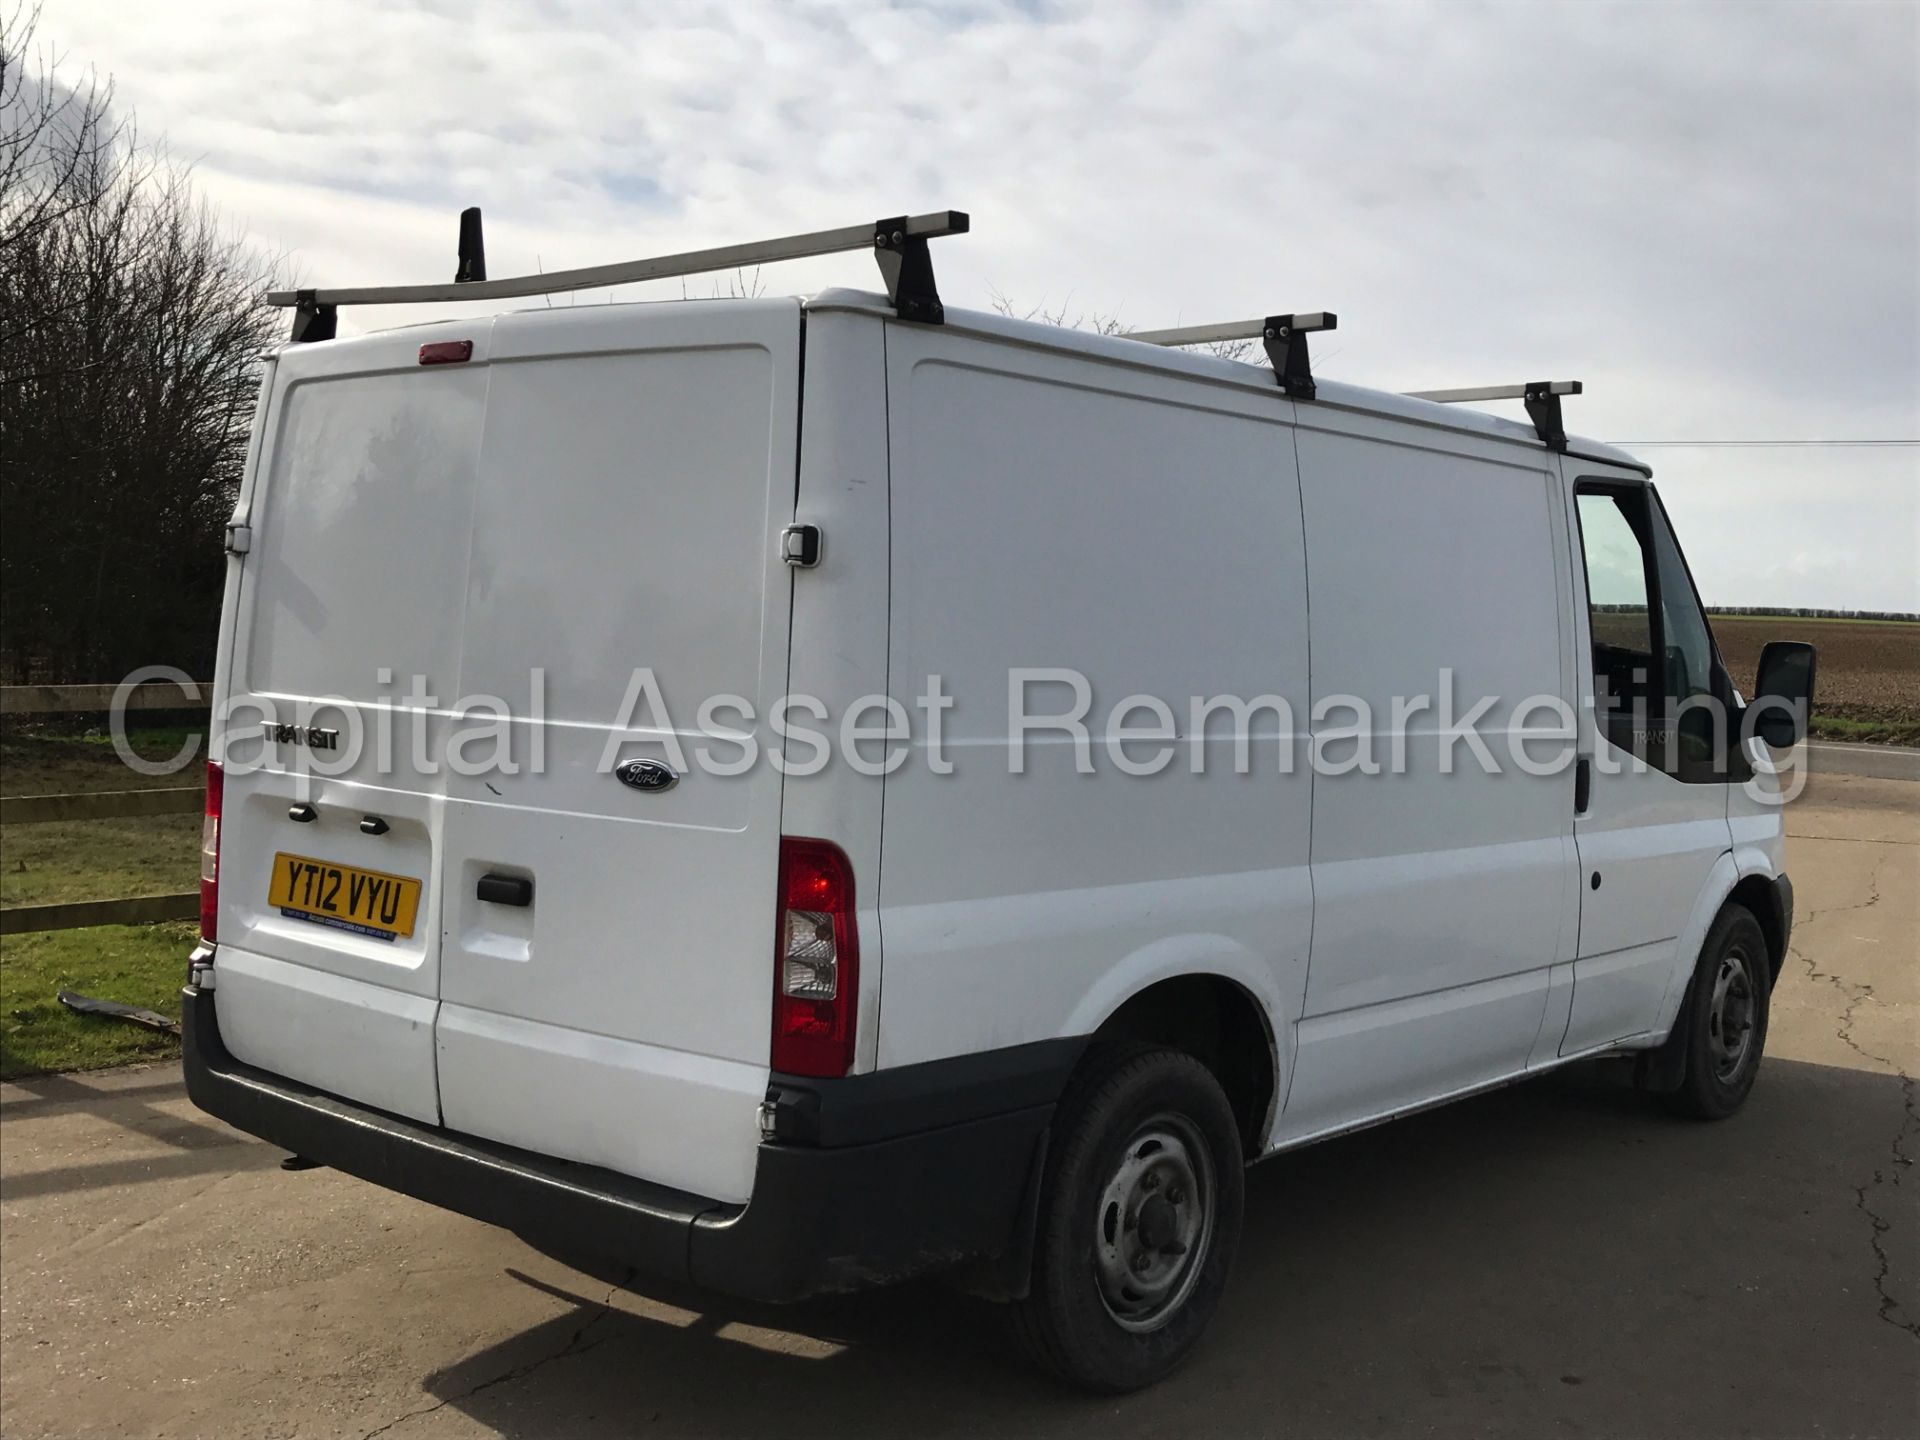 (On Sale) FORD TRANSIT 100 T280 FWD (2012) '2.2 TDCI - SWB - 100 PS - 6 SPEED' (1 FORMER KEEPER) - Image 8 of 19